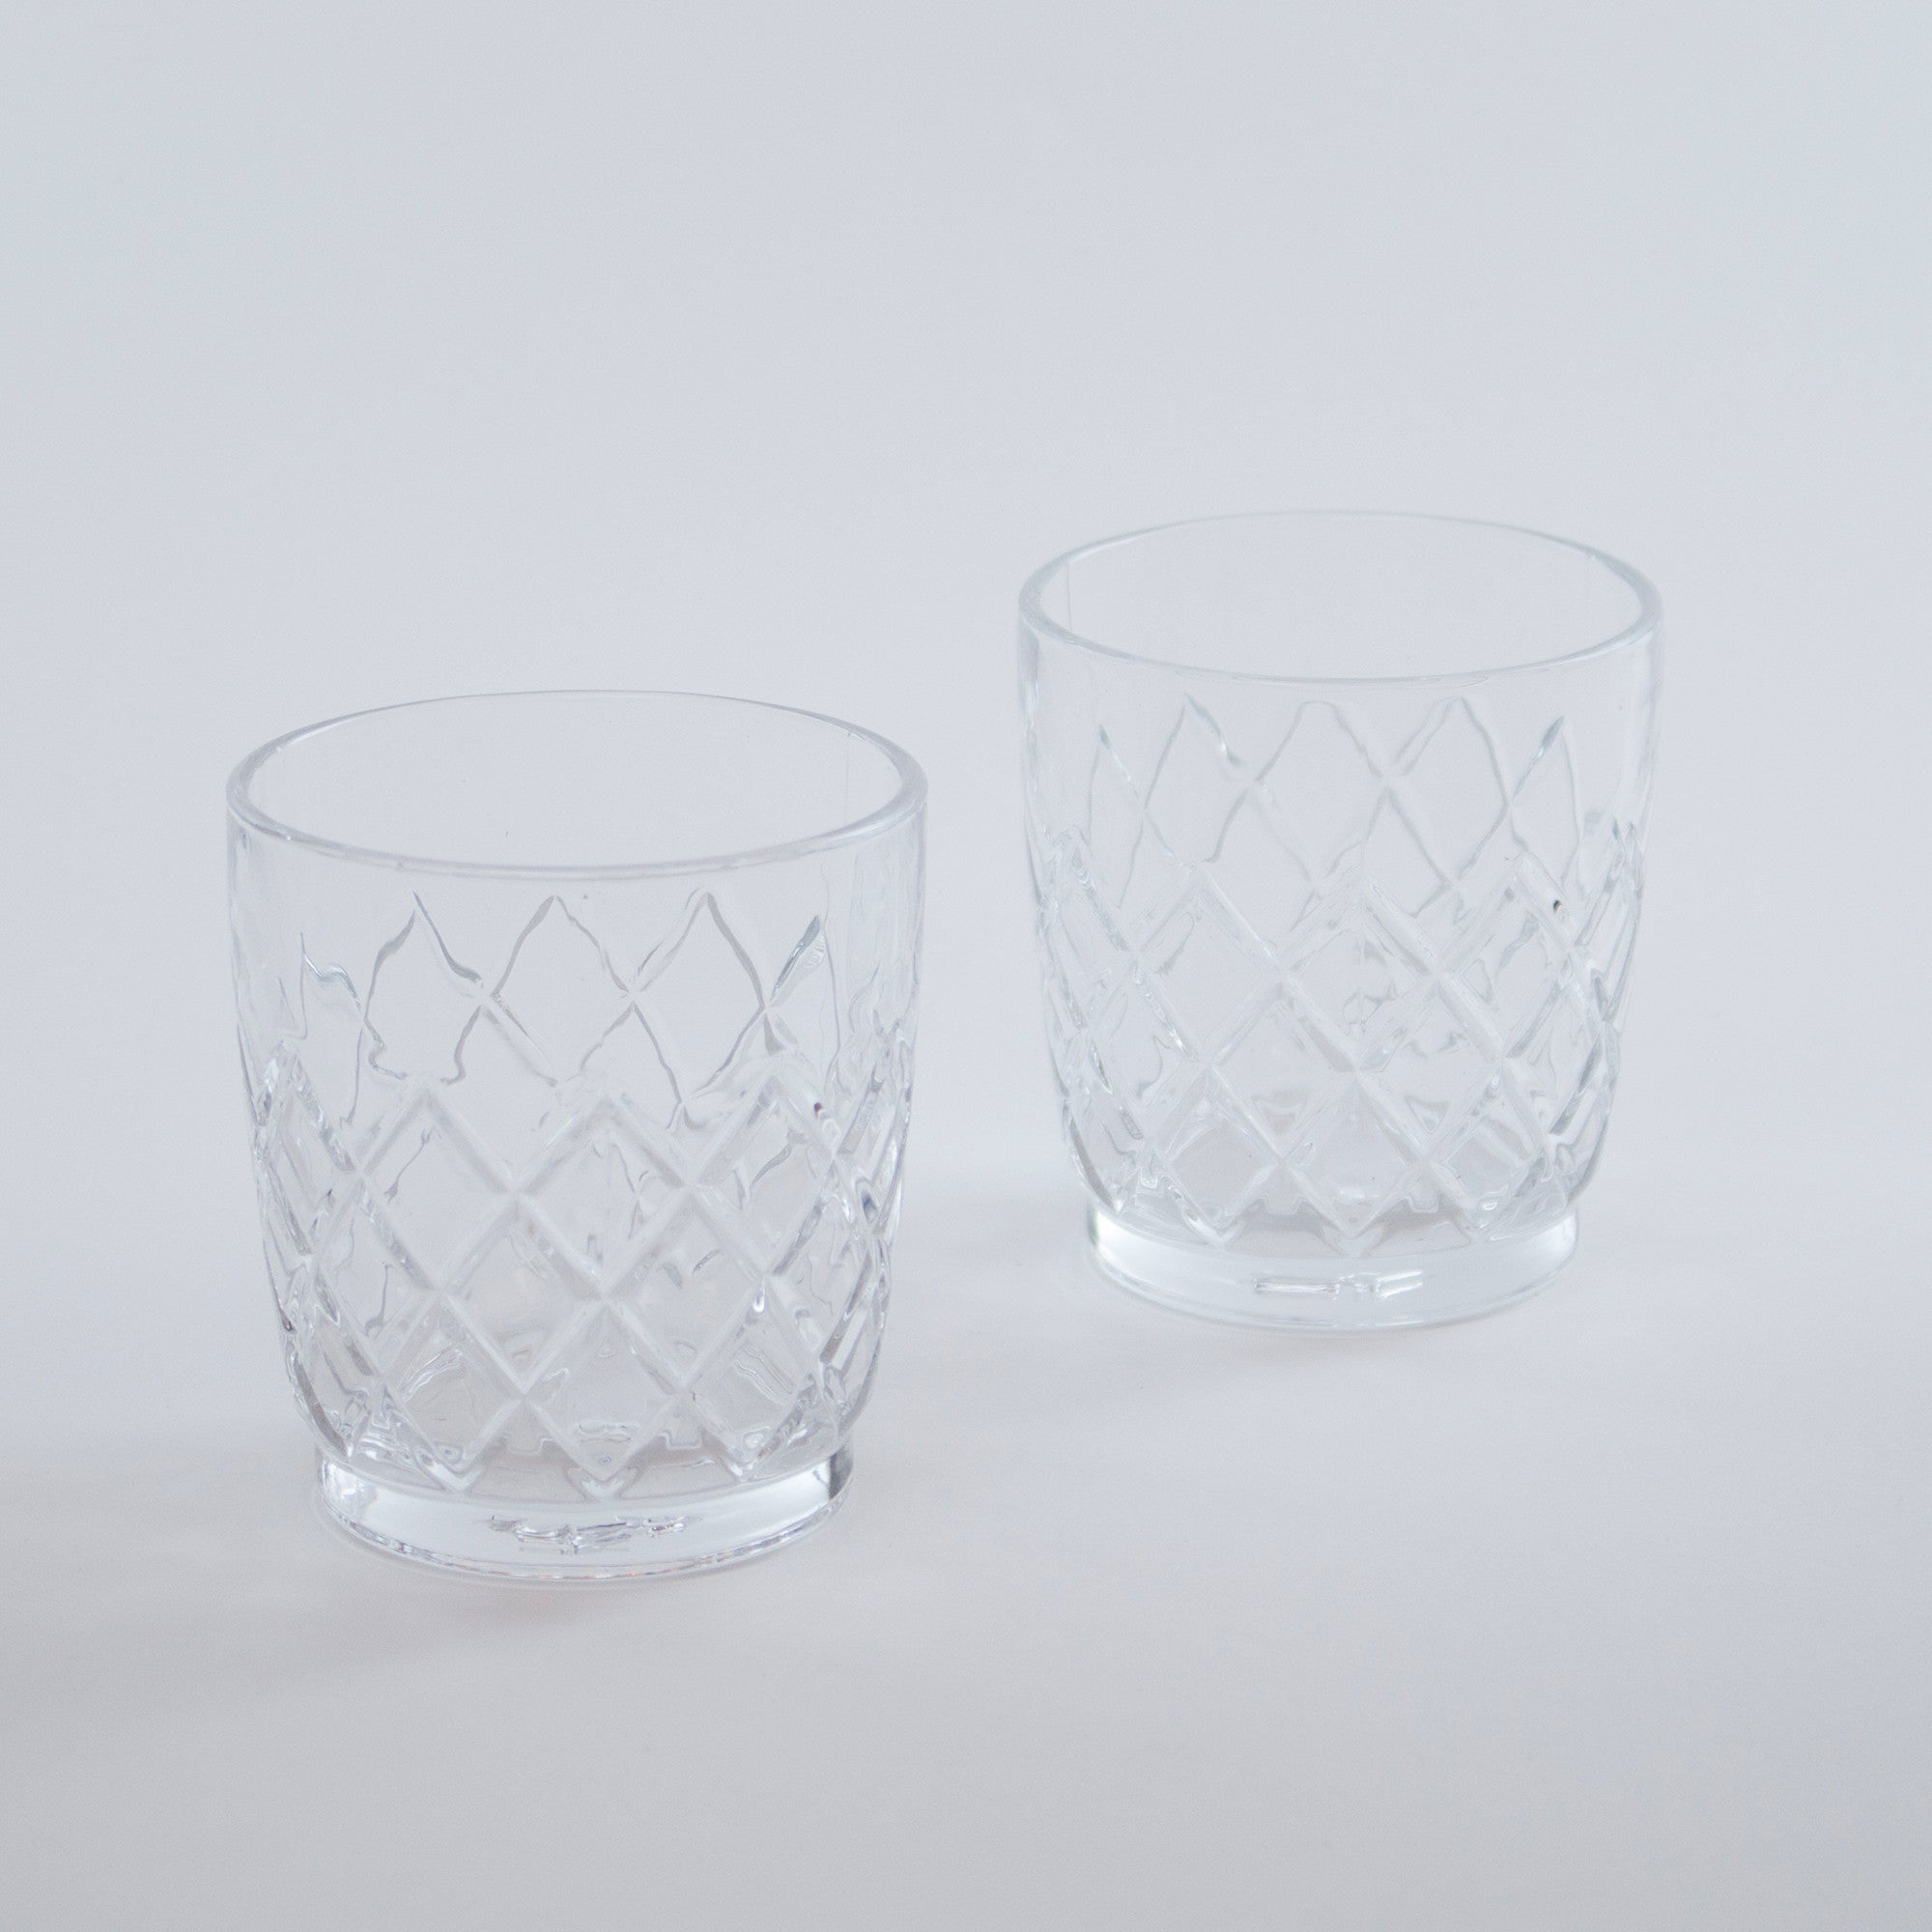 Buswell Collins Glass (Set of 6) - The VinePair Store